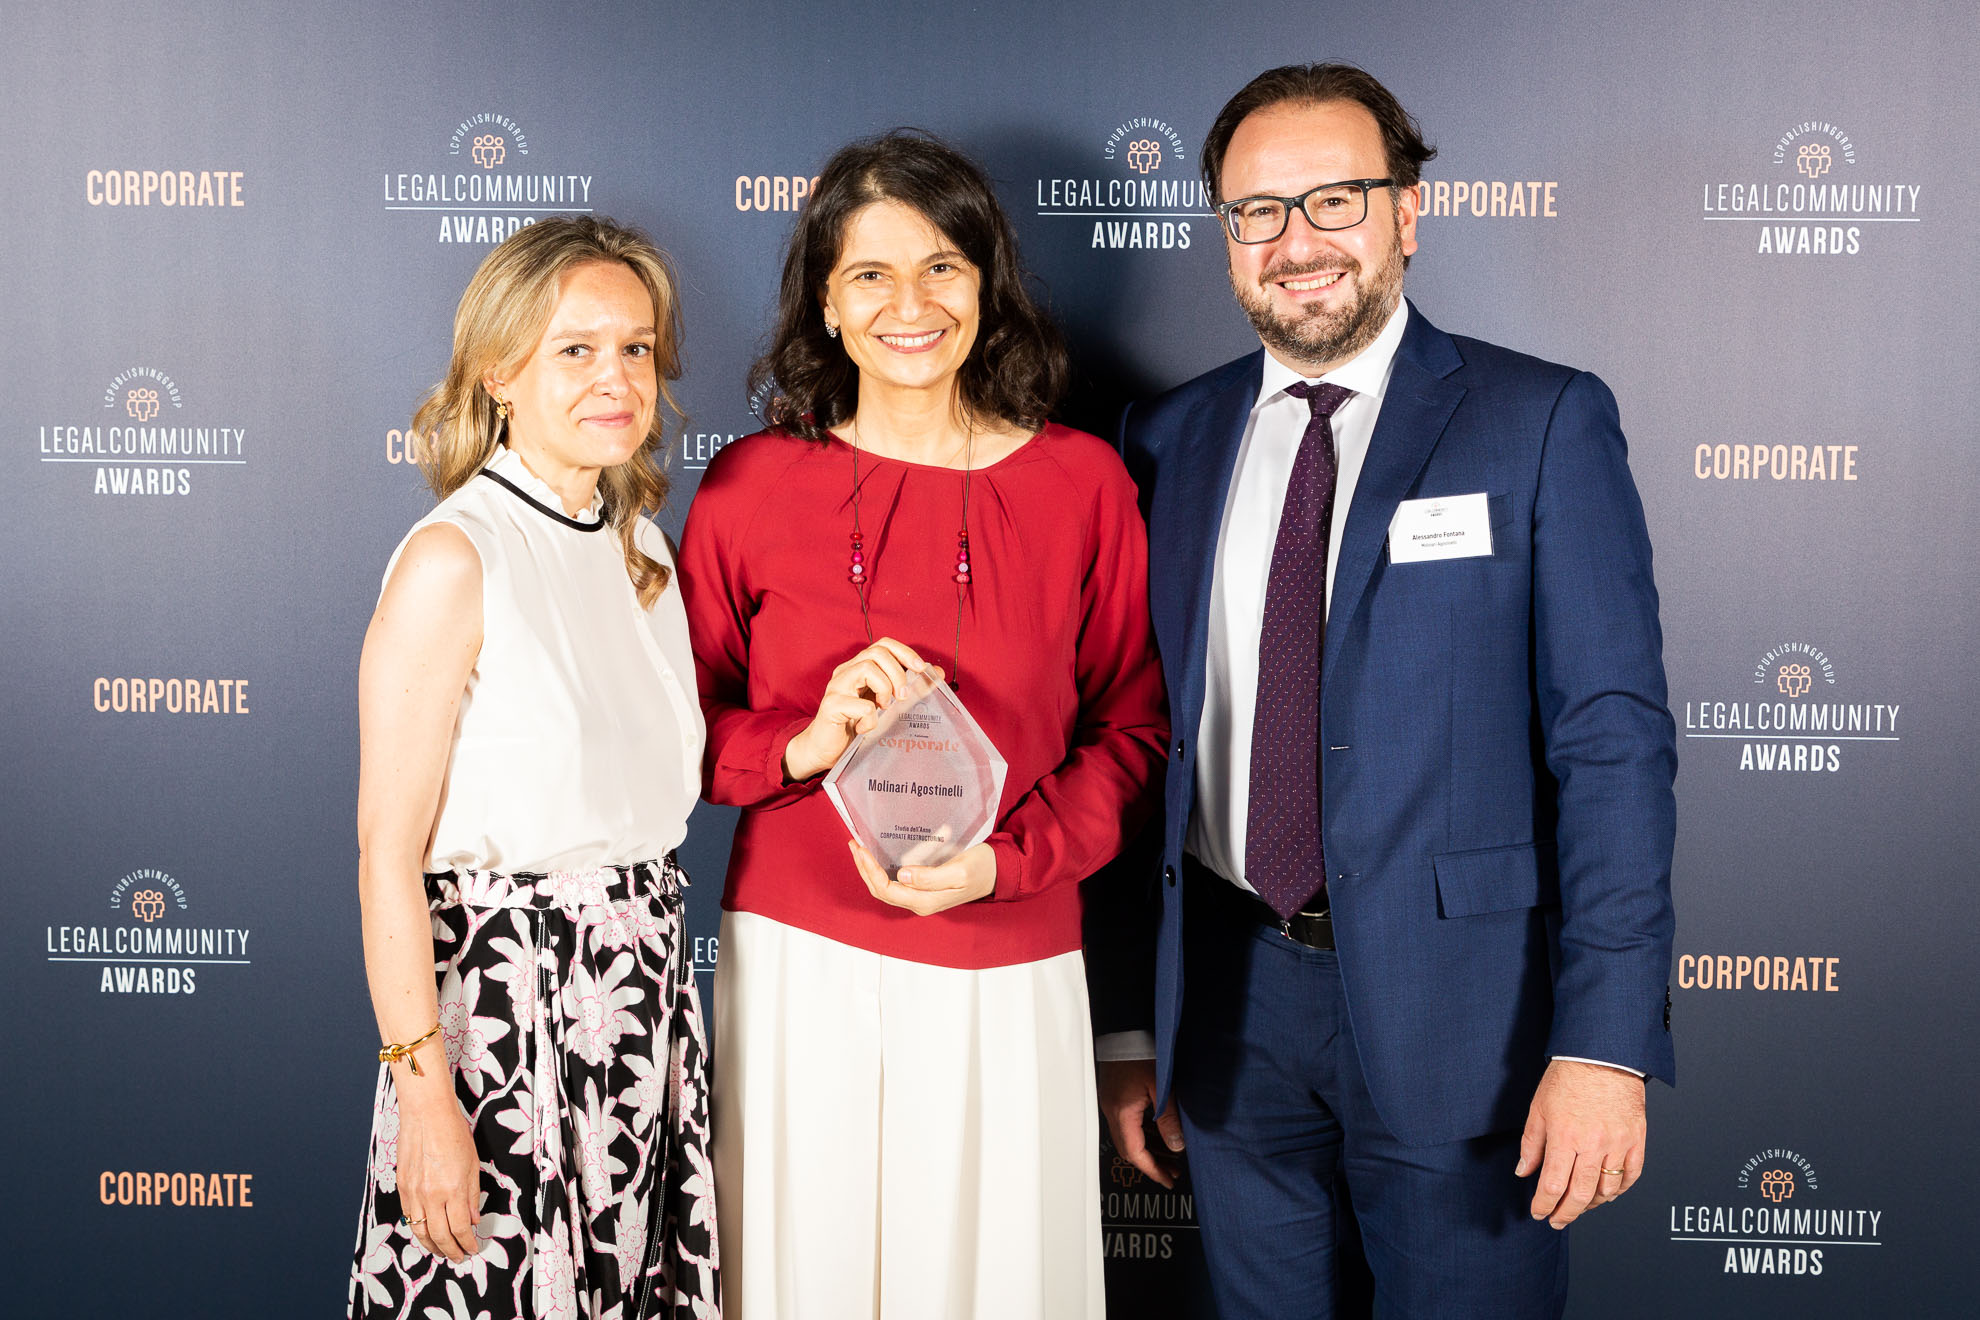 Molinari Agostinelli named Corporate Restructuring Law Firm of the Year at the 2021 Legalcommunity Corporate Awards